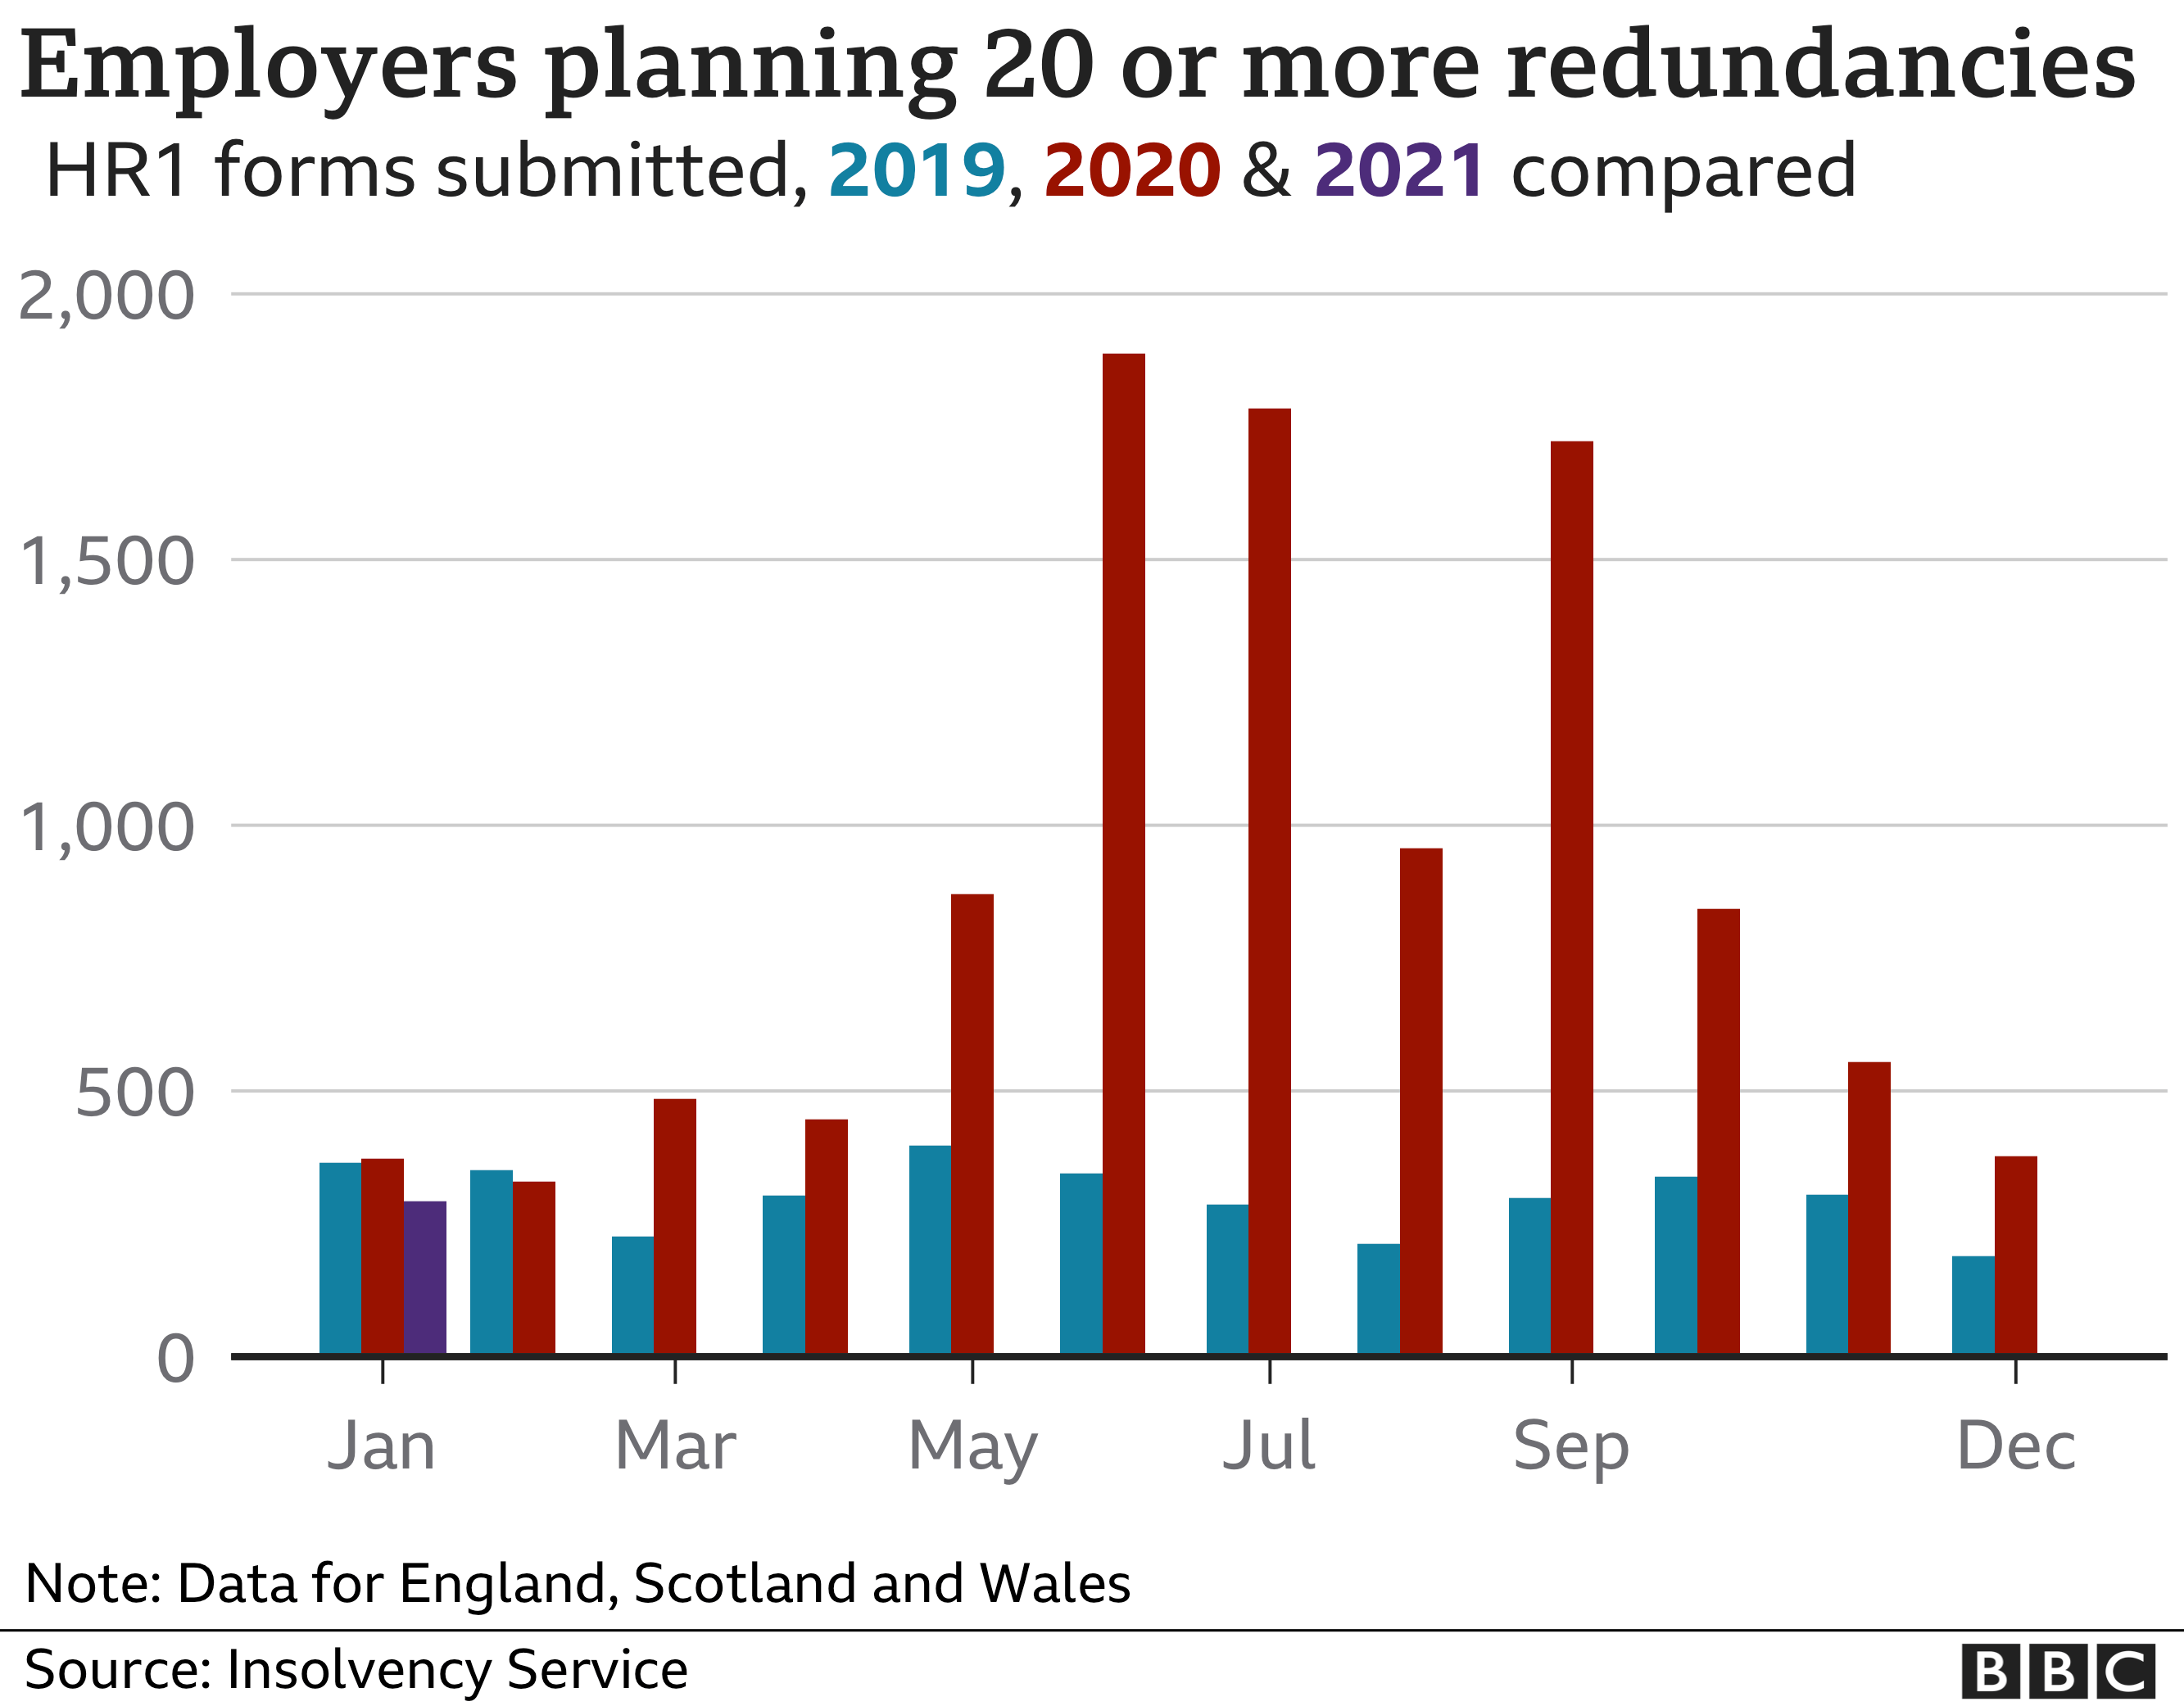 Graph showing number of employers planning redundancies in Britain, according to Insolvency Service data for 2019, 2020 and 2021.